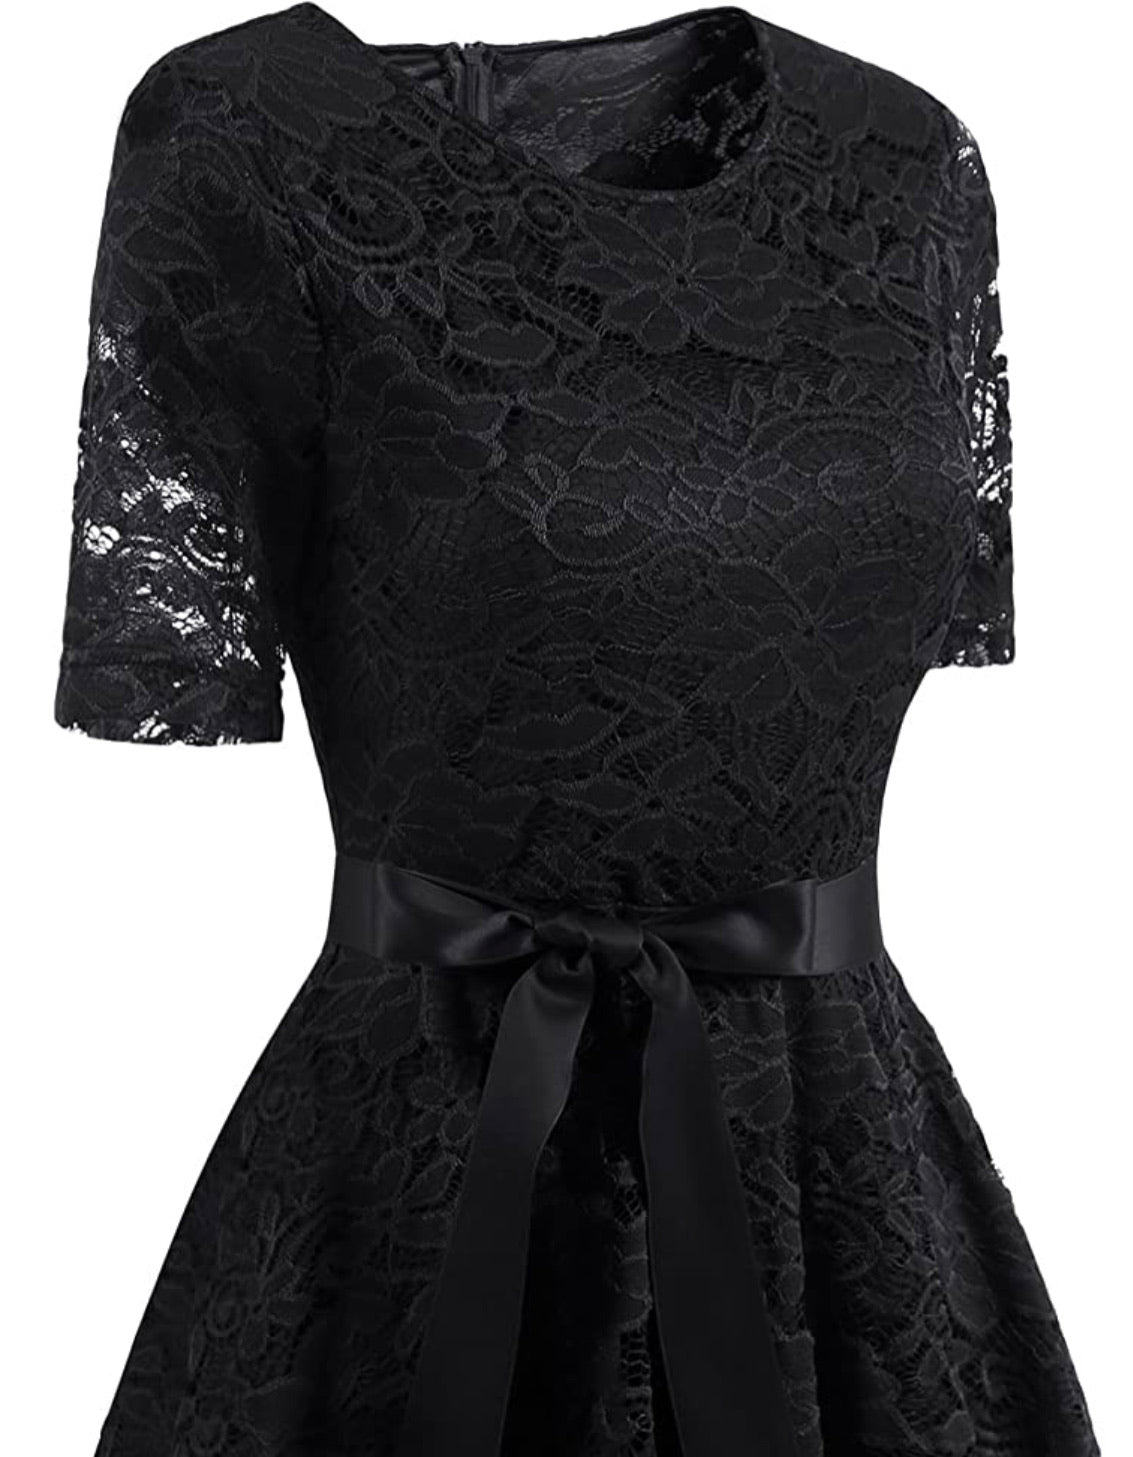 Vintage Inspired Full Lace Cocktail Dress, Sizes Small - 3XLarge (Black)